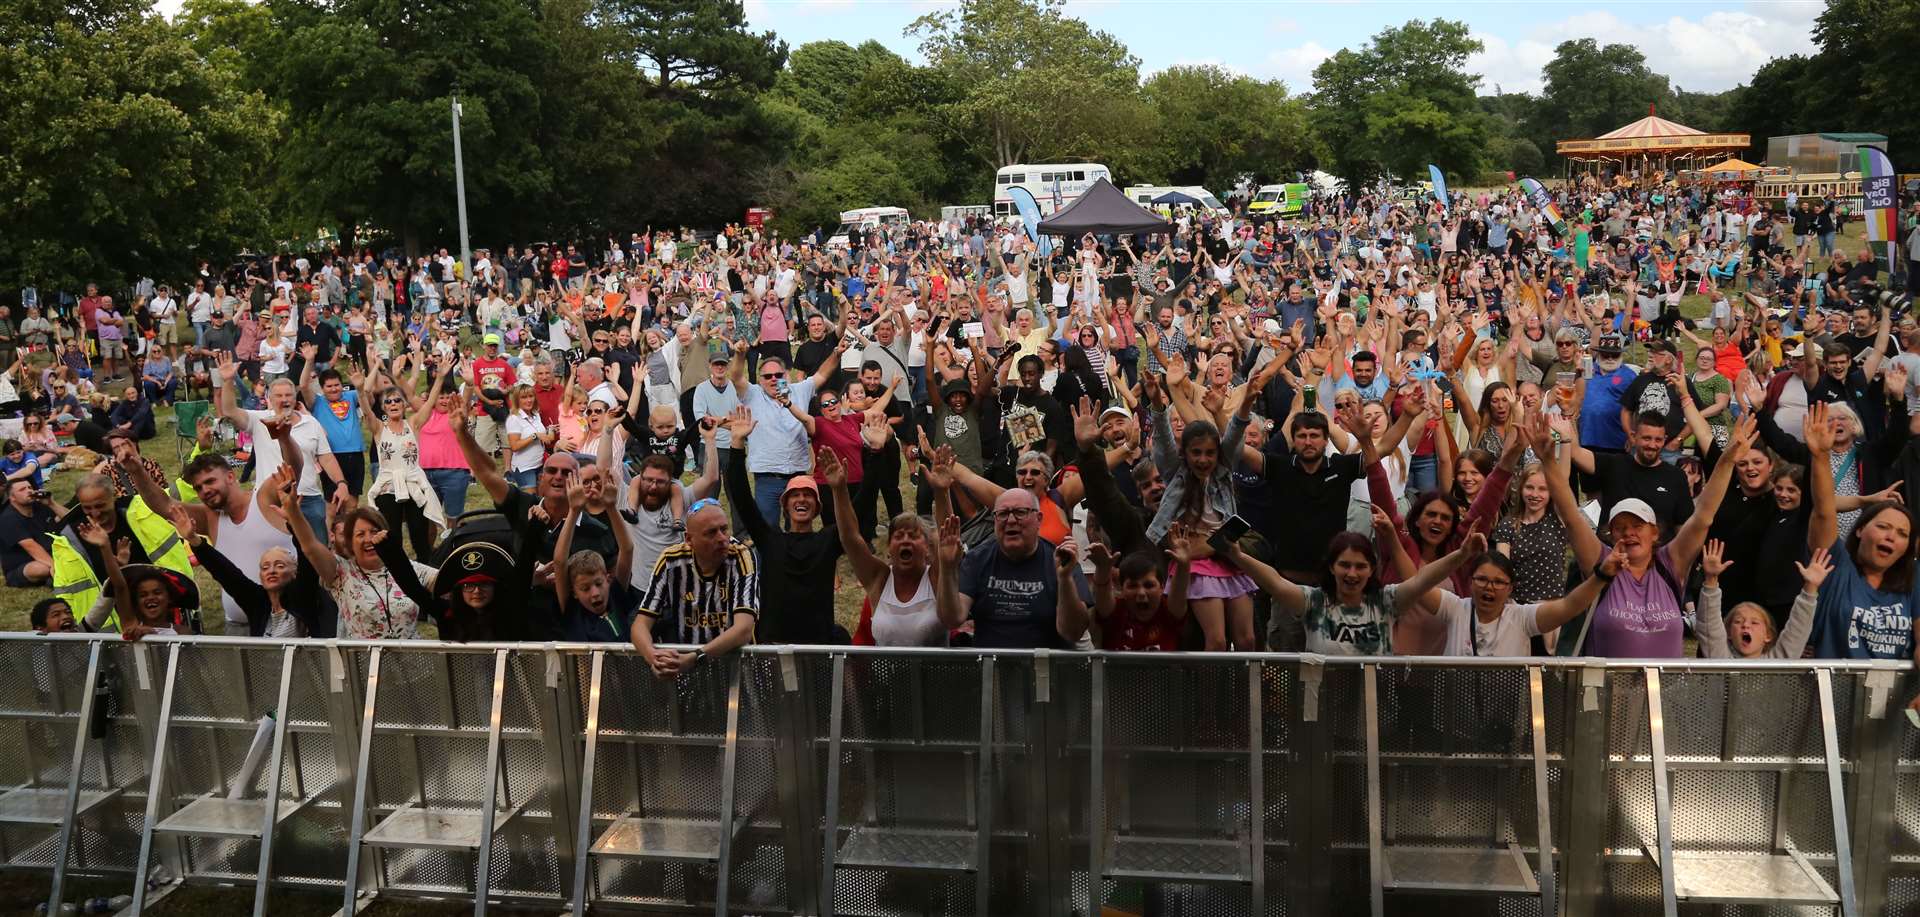 Thousands enjoyed the music at Dartford's annual Big Day Out event. Pics by Dartford Borough Council/ Andy Barnes Photography